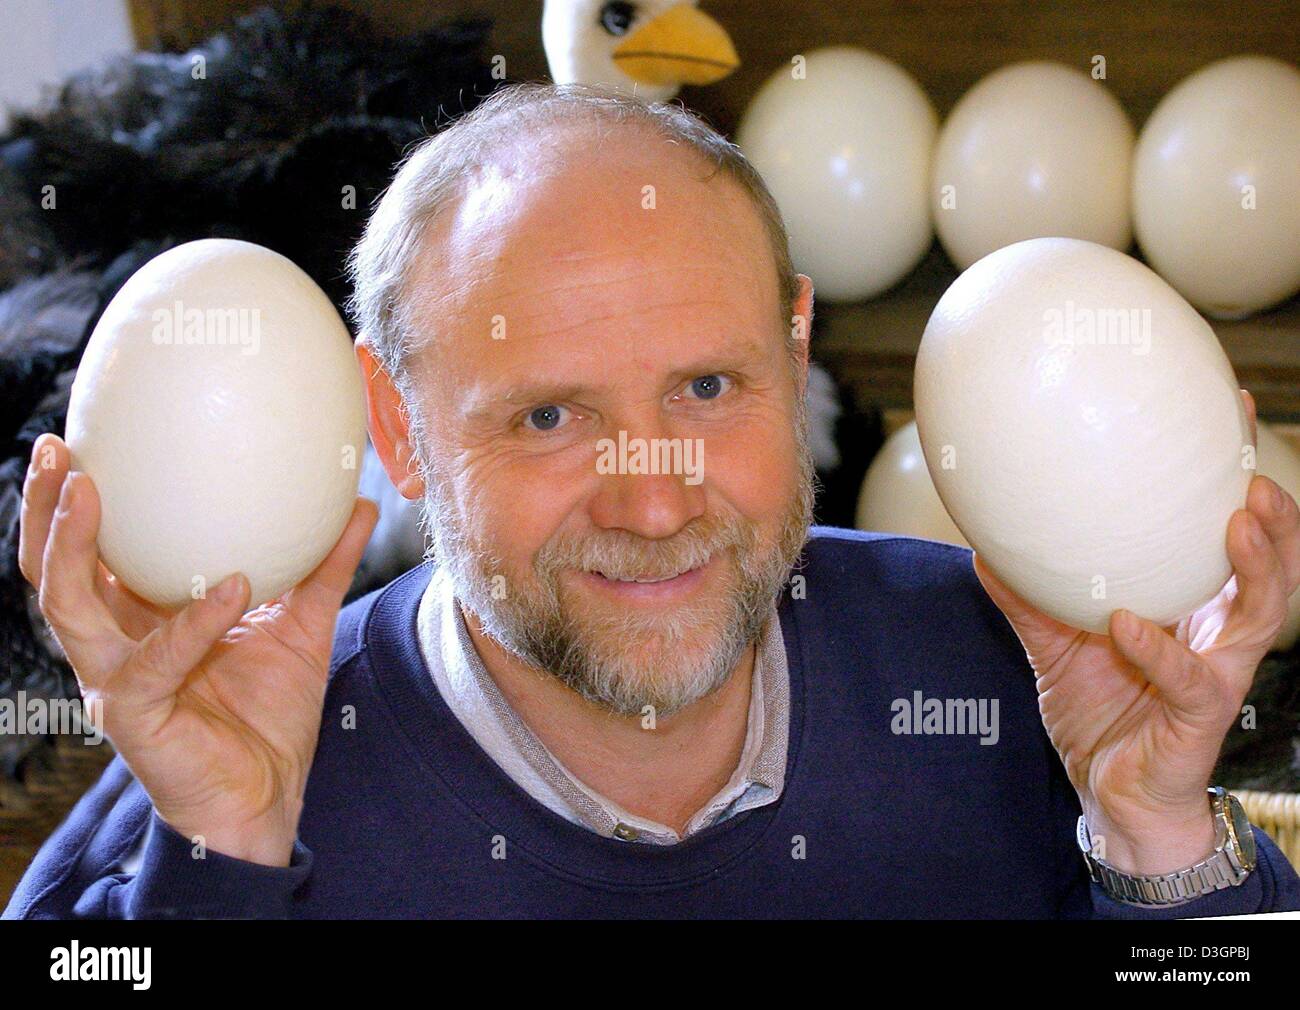 (dpa) - Farmer Hans-Juergen Krause shows two ostrich eggs at his ostrich farm in Neu Heinde, eastern Germany, 27 February 2004. The farmer brings up about 100 ostrichs every year. Apart from their meat, the ostrich's feathers and XXL eggs are sold in a shop at the farm. Stock Photo